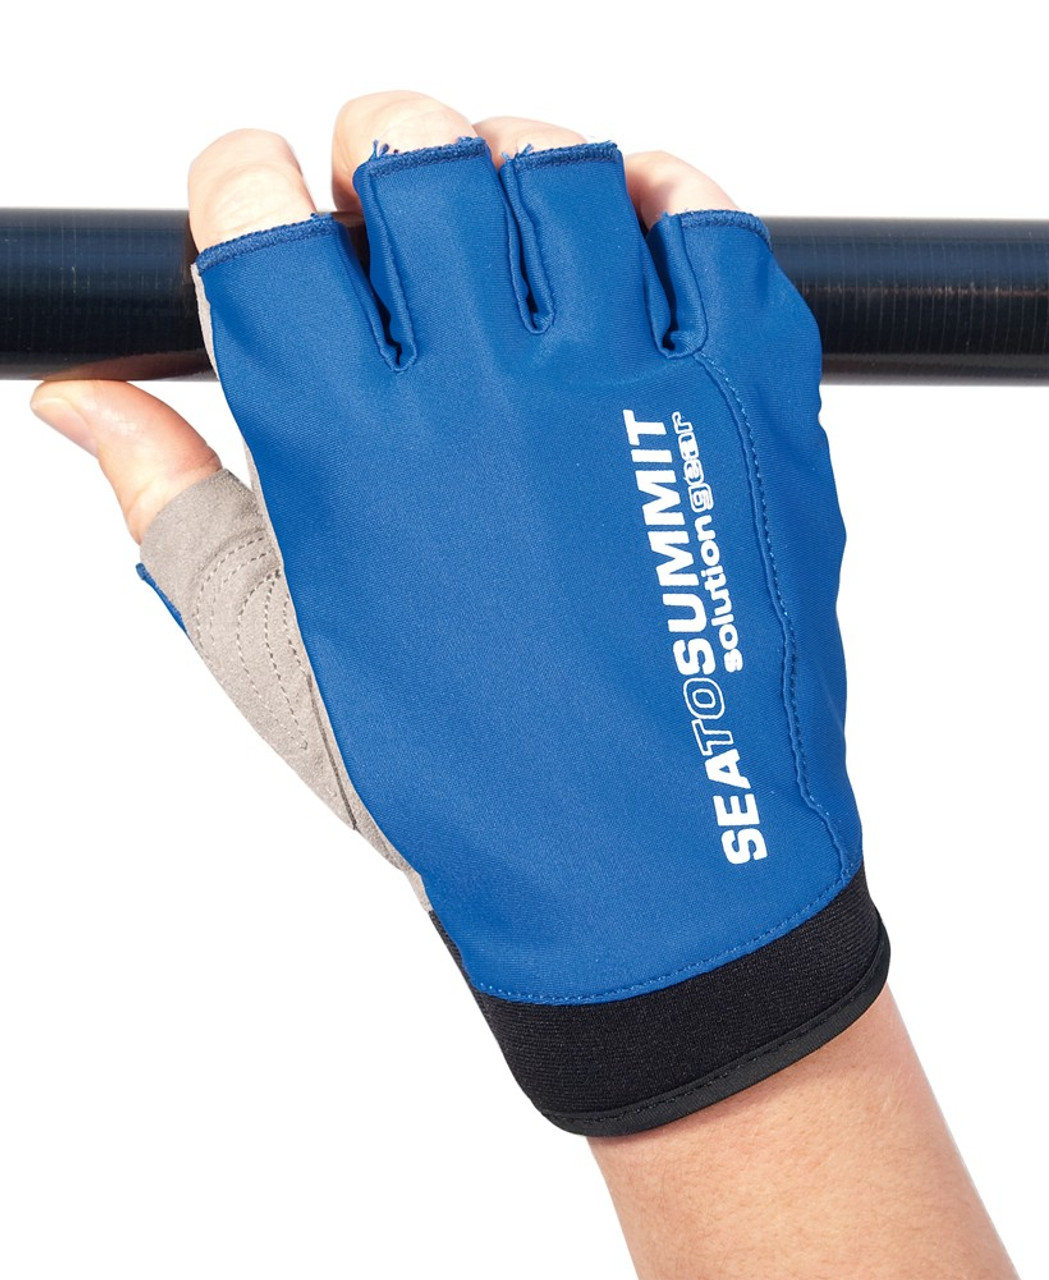 Sea to Summit Eclipse Paddle Gloves